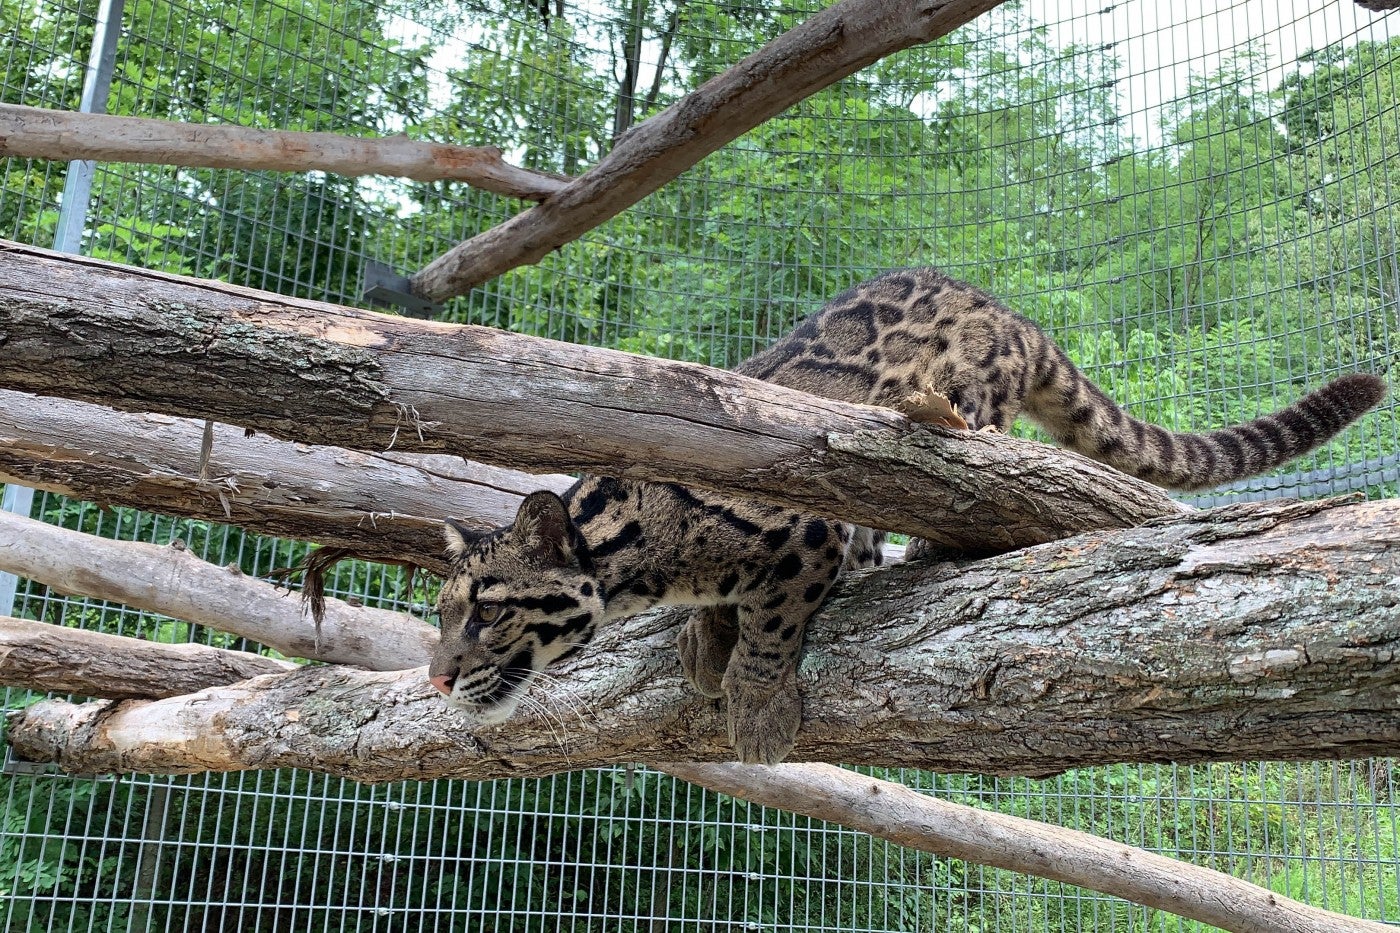 Clouded leopard Ariel crouches on a tree branch suspended in the air. 